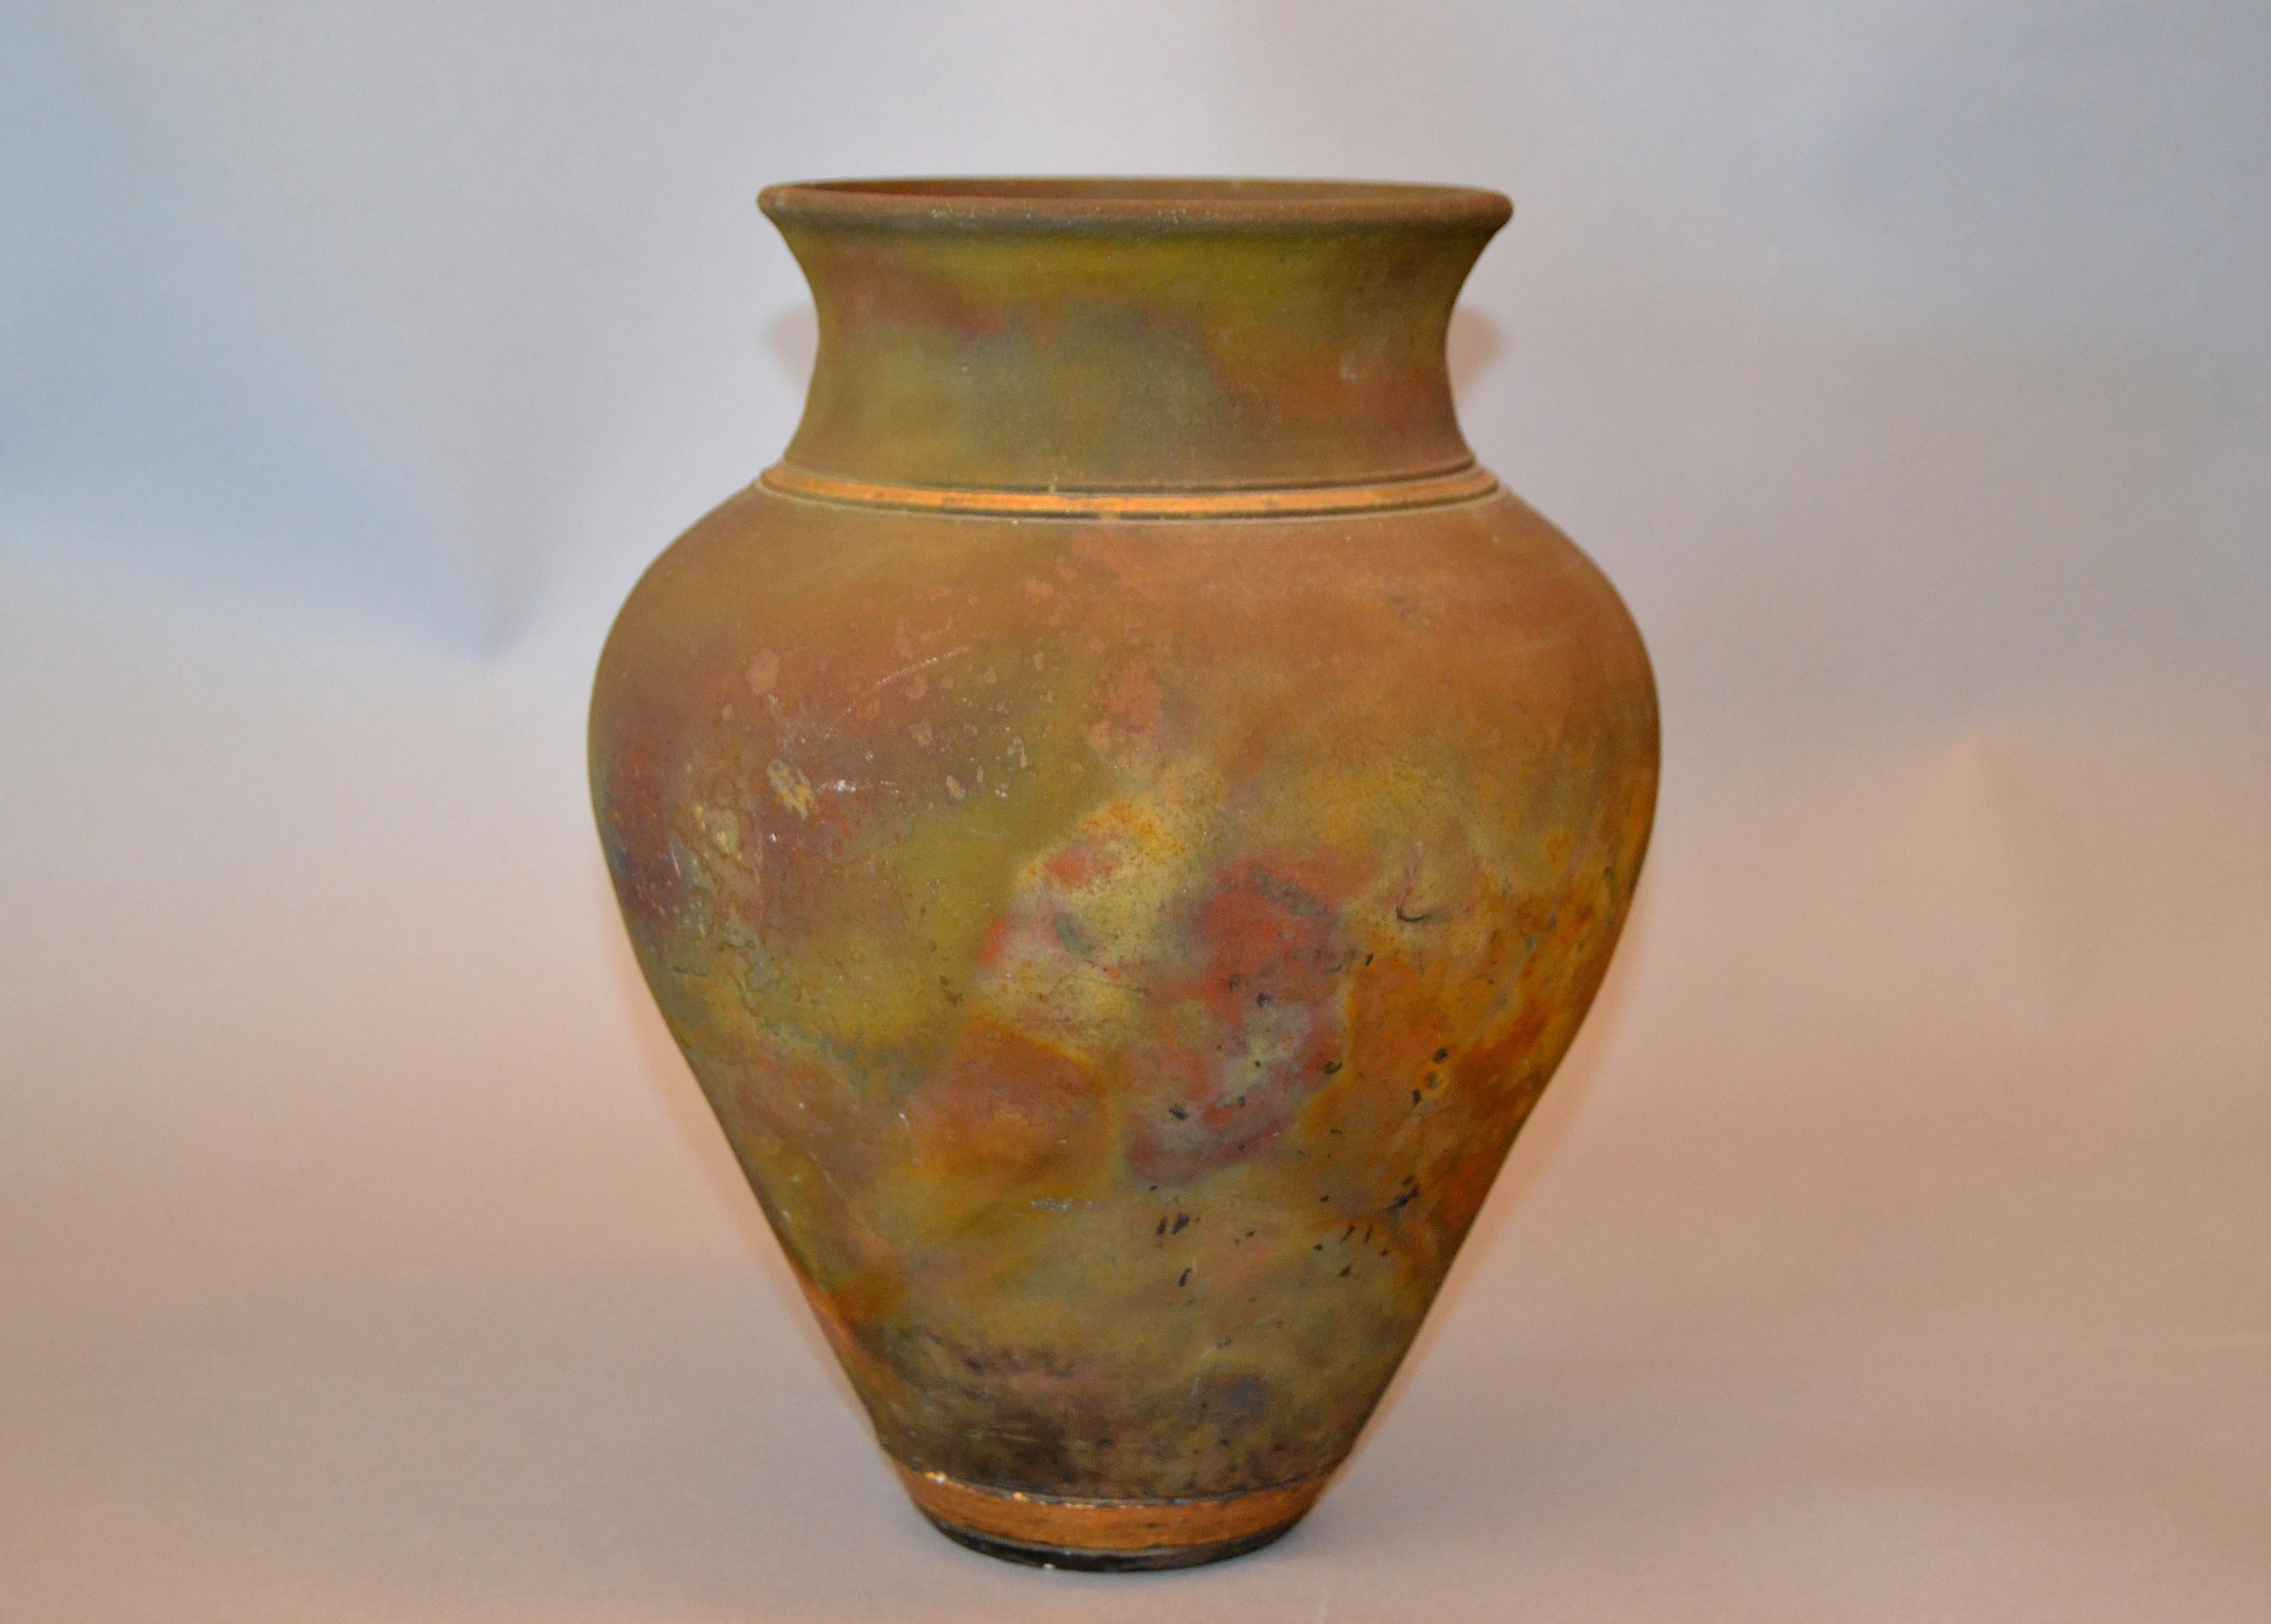 Signed American Raku Mid-Century Modern inside glazed handcrafted beige, blue, gold and brown vase, vessel or urn.
The Studio Art Pottery is signed at the base.
         